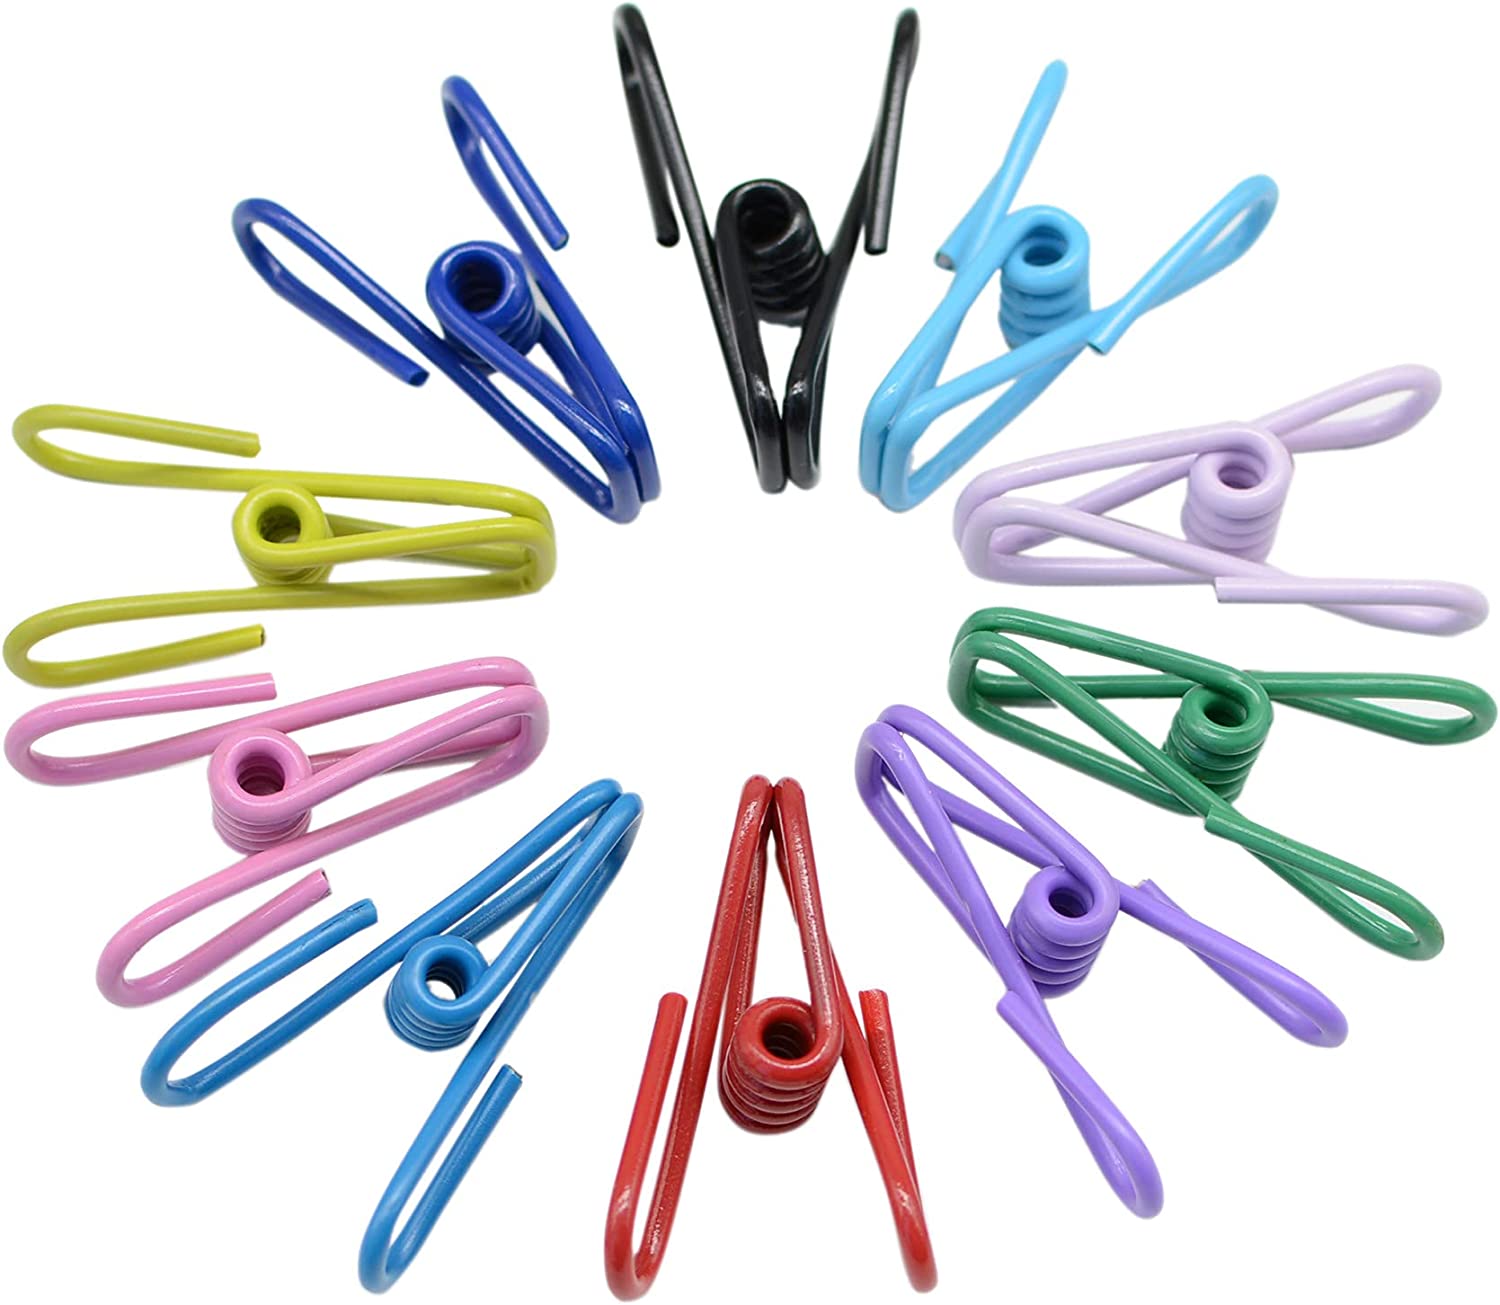 Yansanido Assorted Colors Metal Chip Clips, 30-Piece